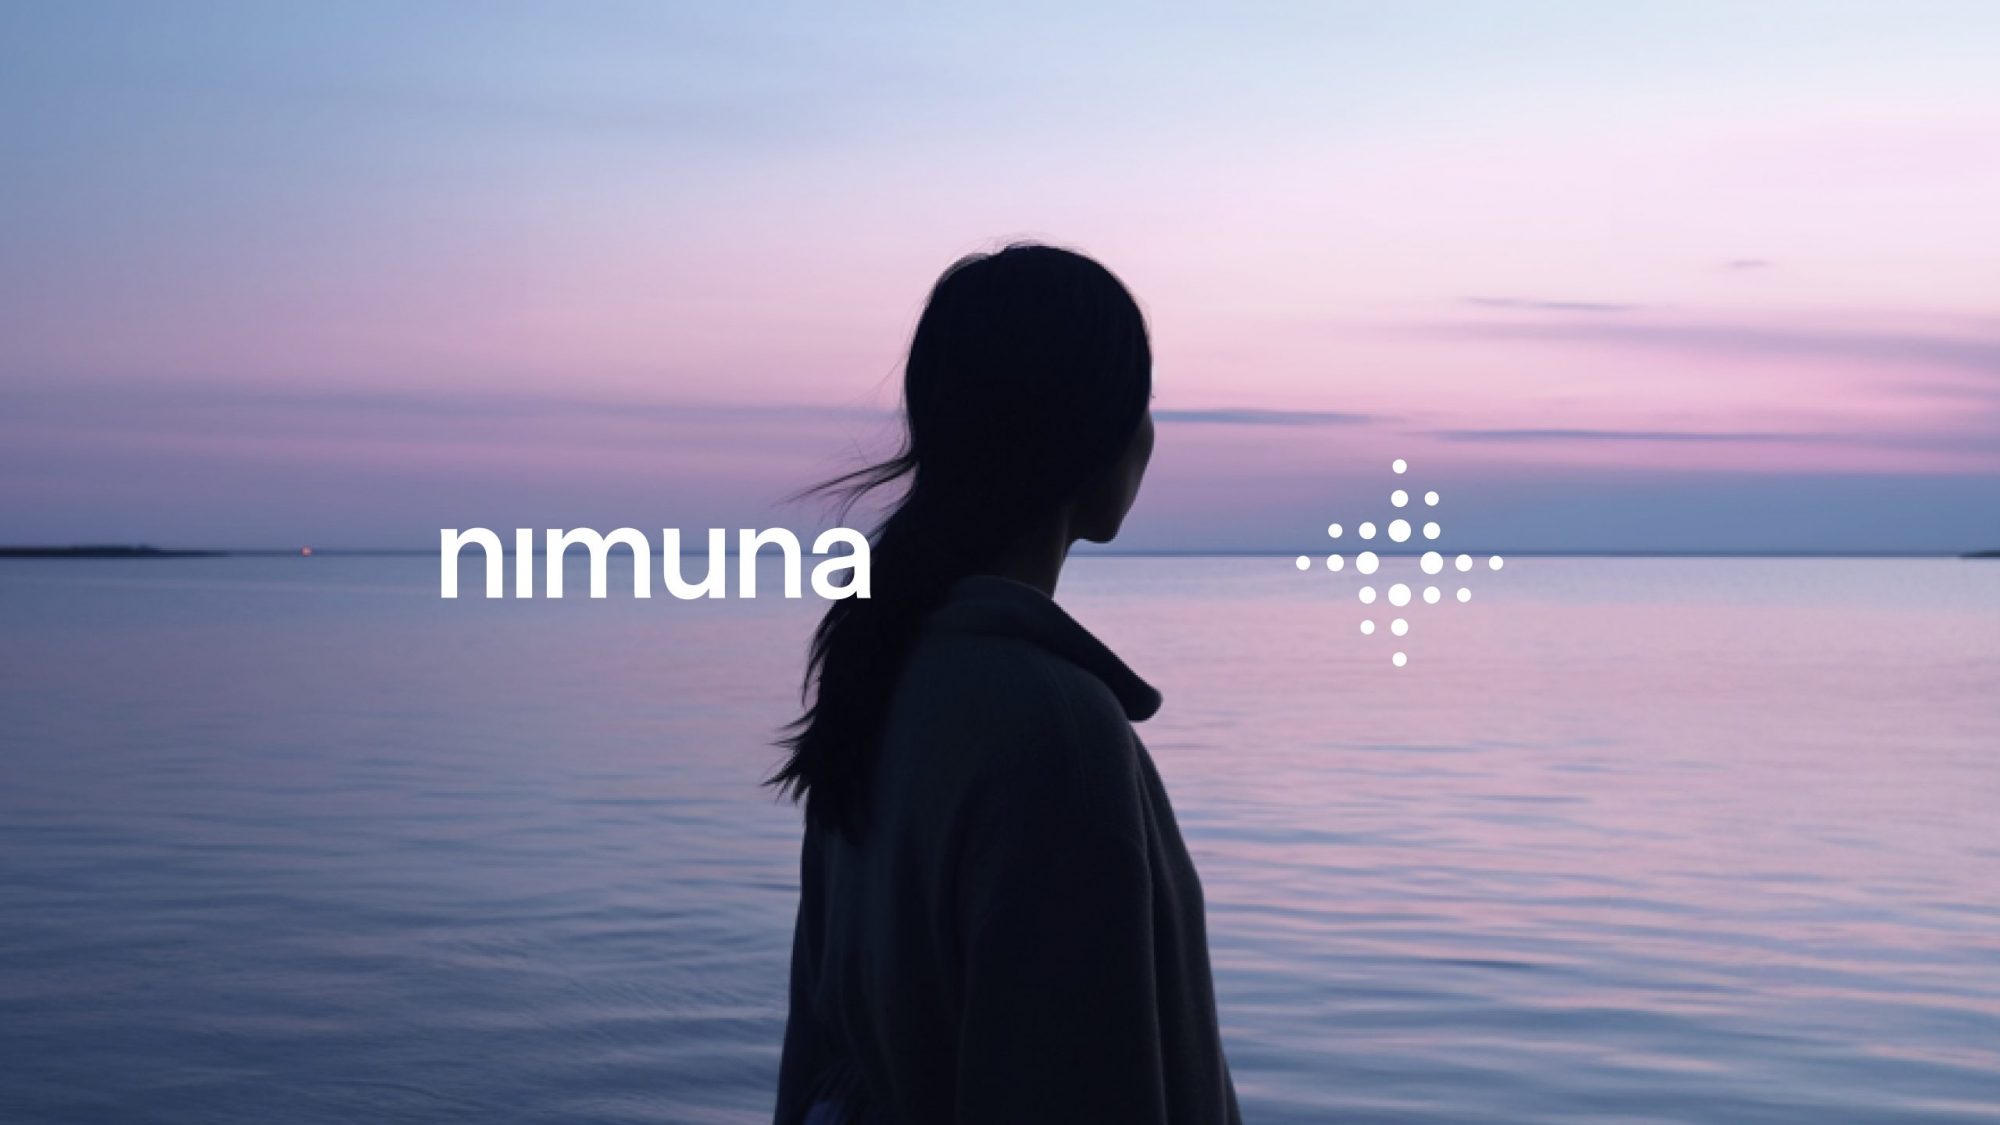 A minimalist logo featuring interconnected dots and stylish typography, complemented by a serene image of a woman gazing out towards the tranquil sea